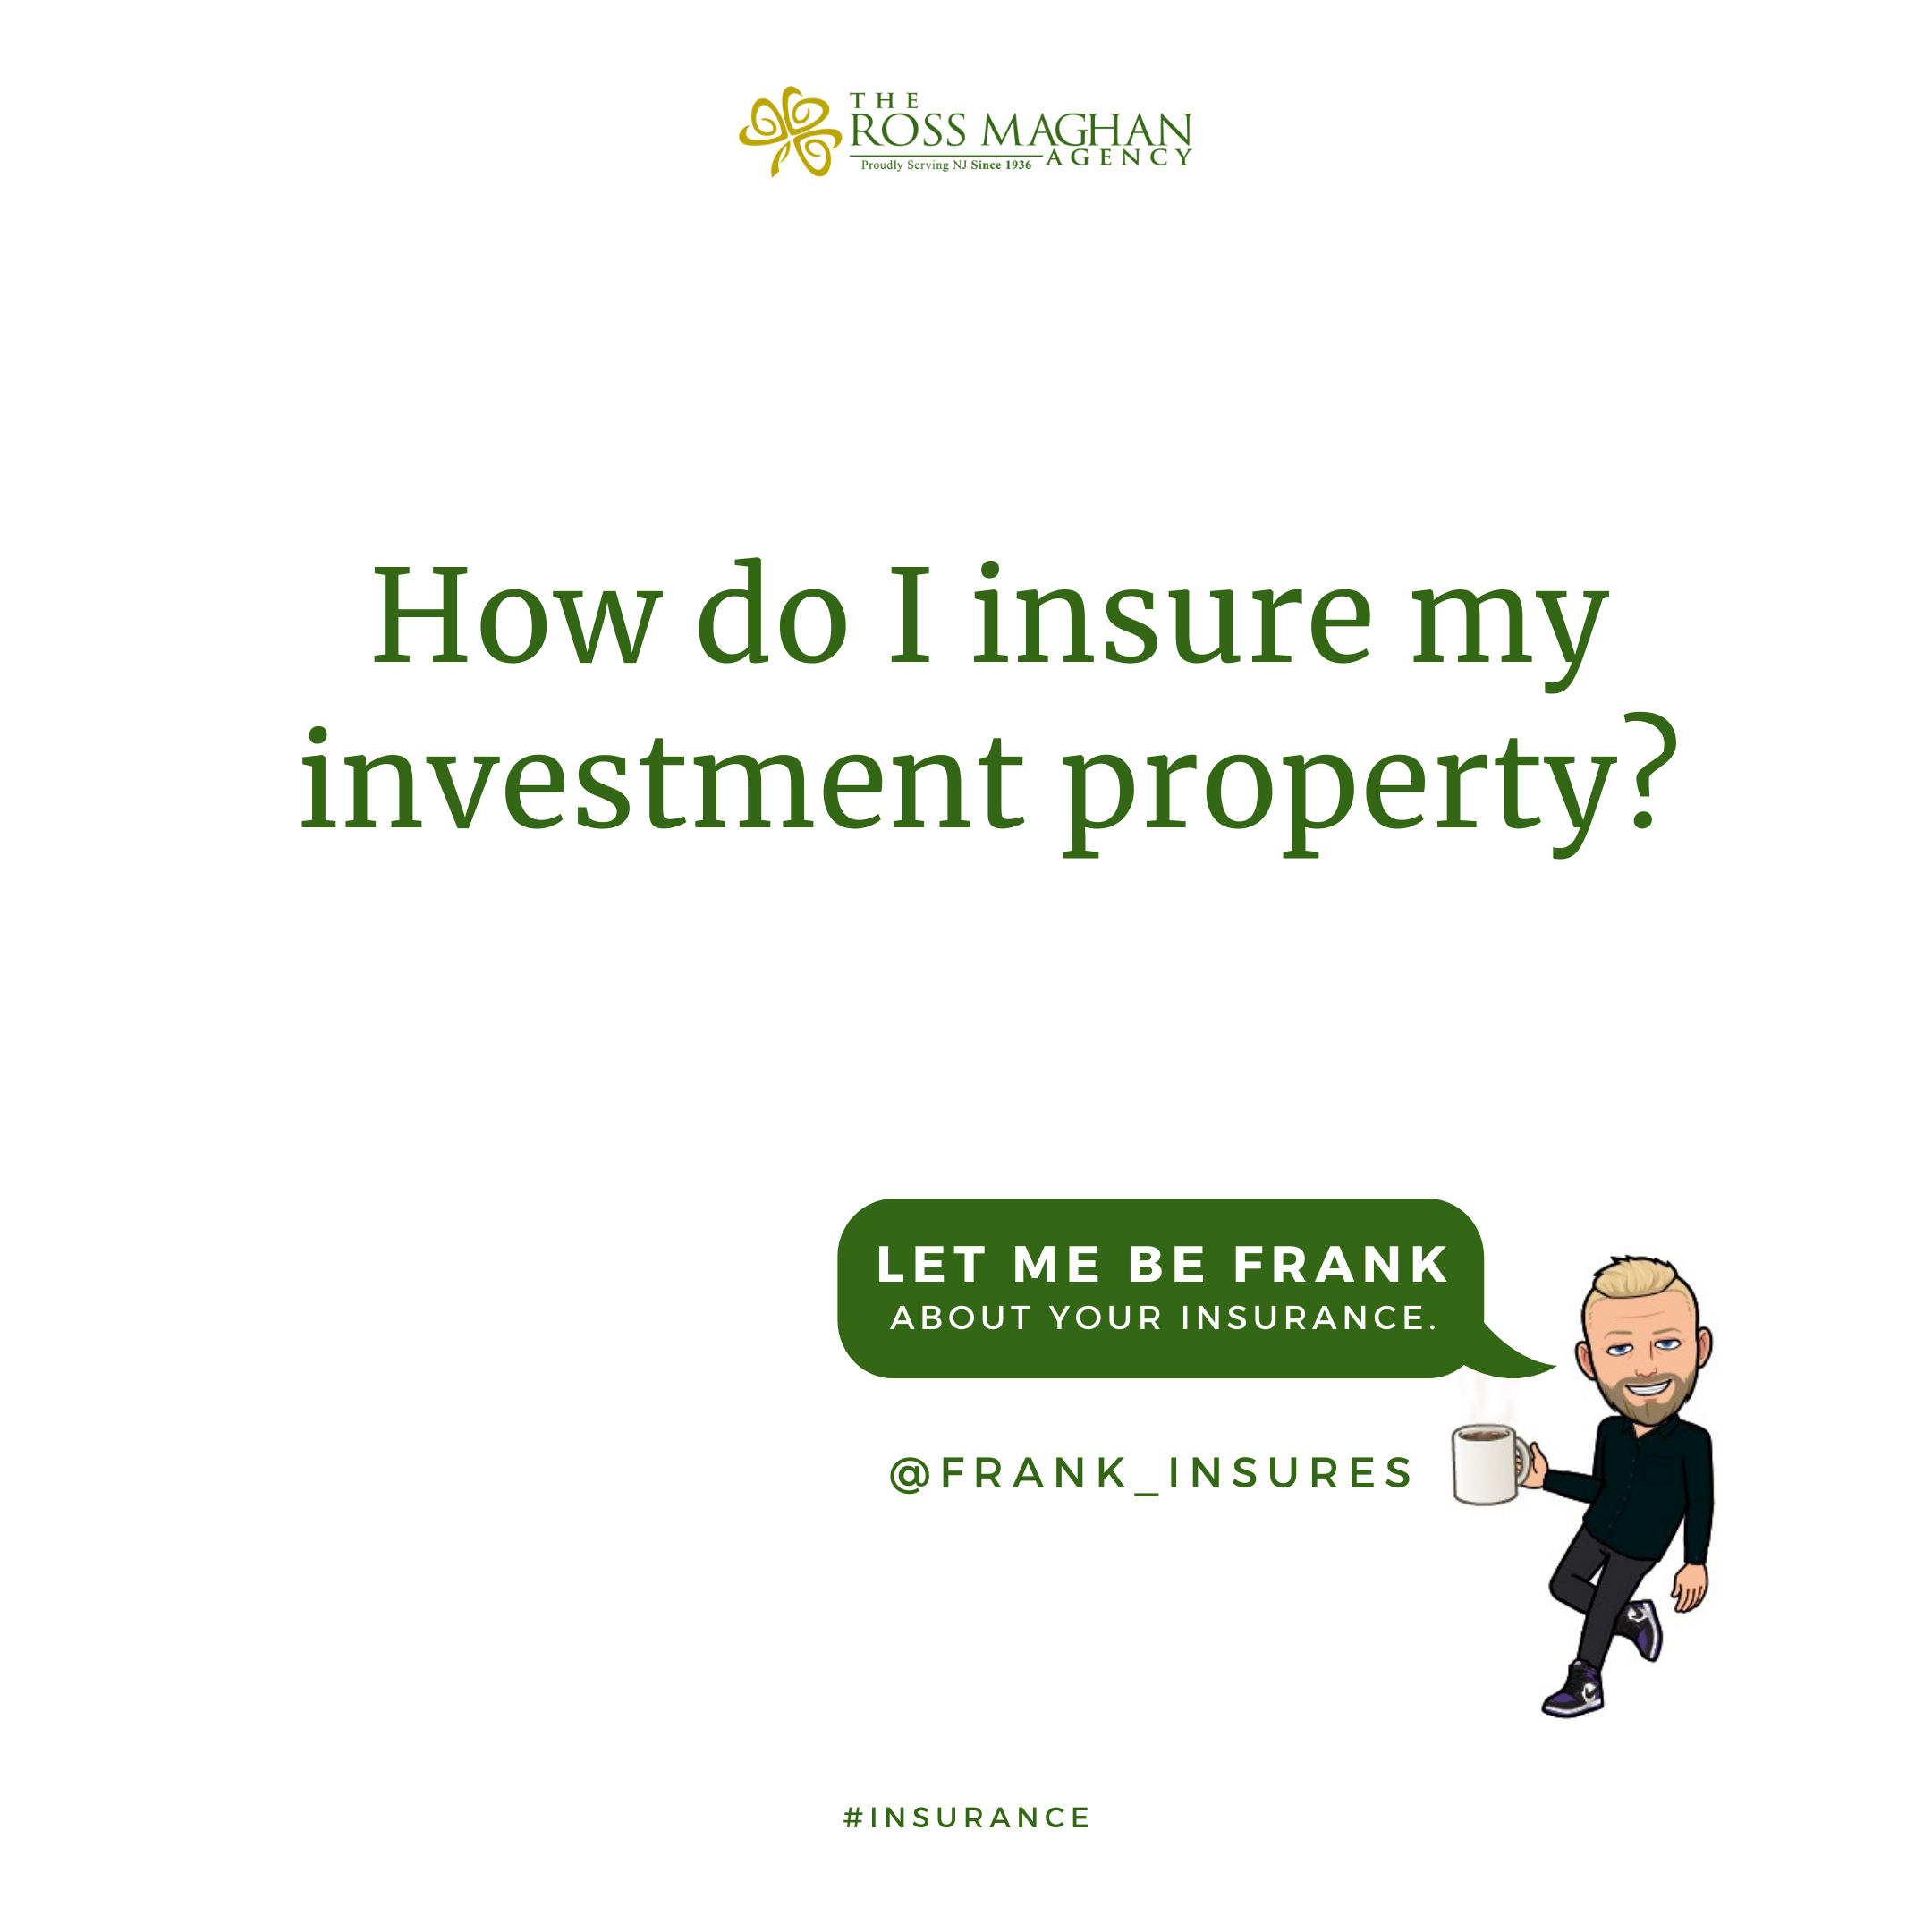 Featured image for “How do I insure my investment property?”